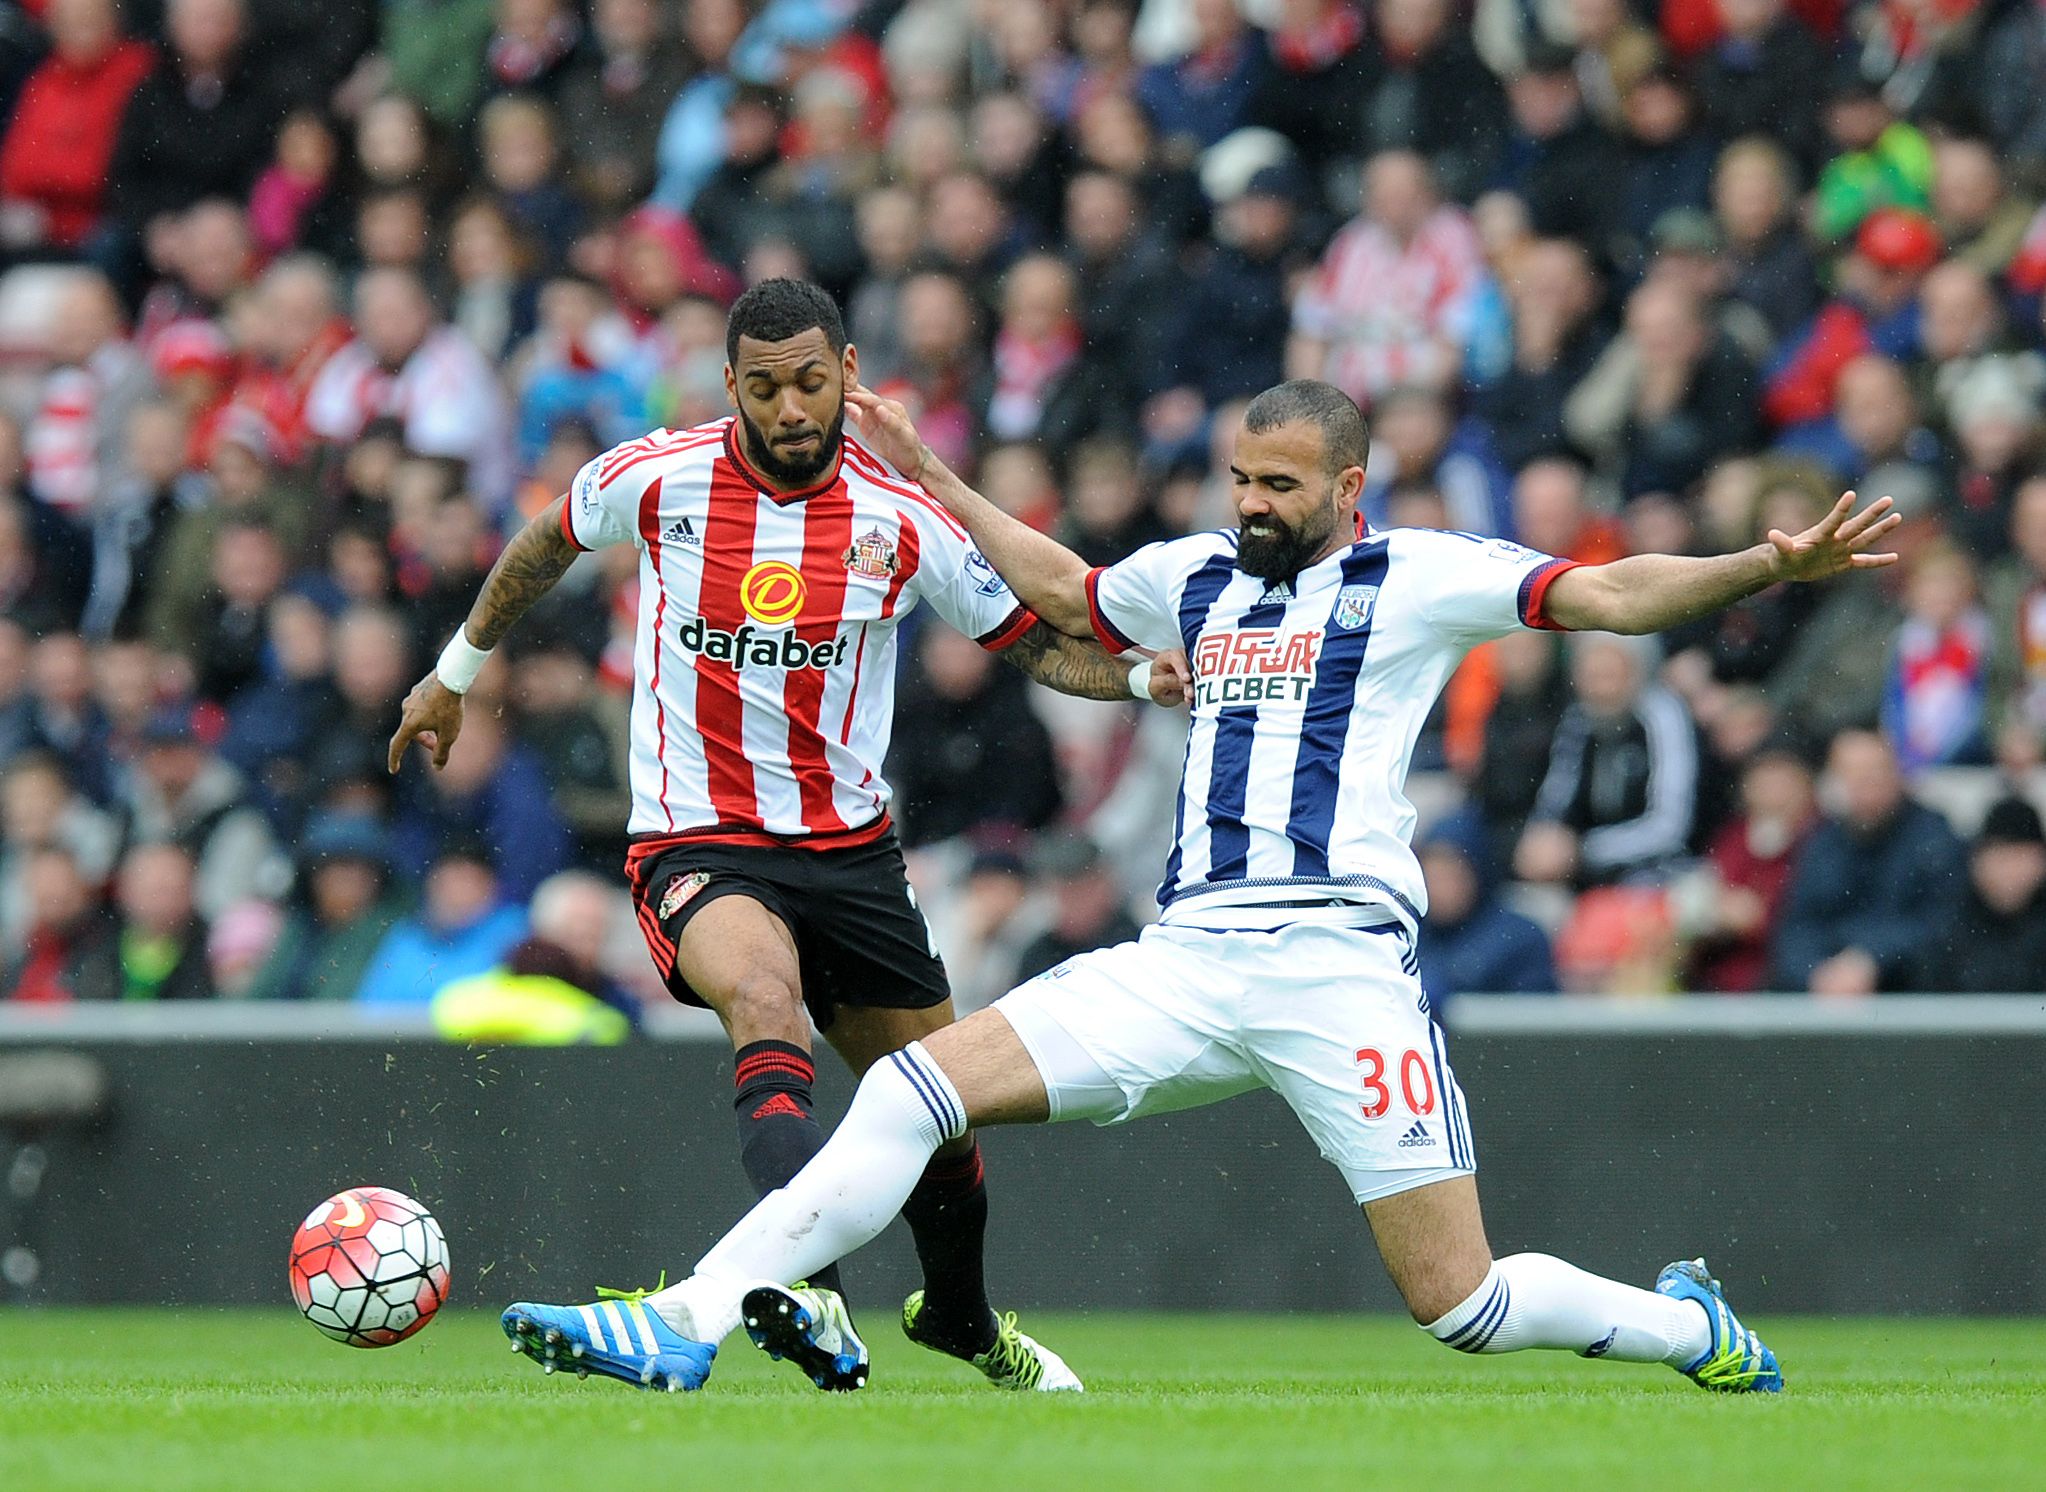 Yann M'Vila in action against Albion while playing for Sunderland in the 2015/16 season